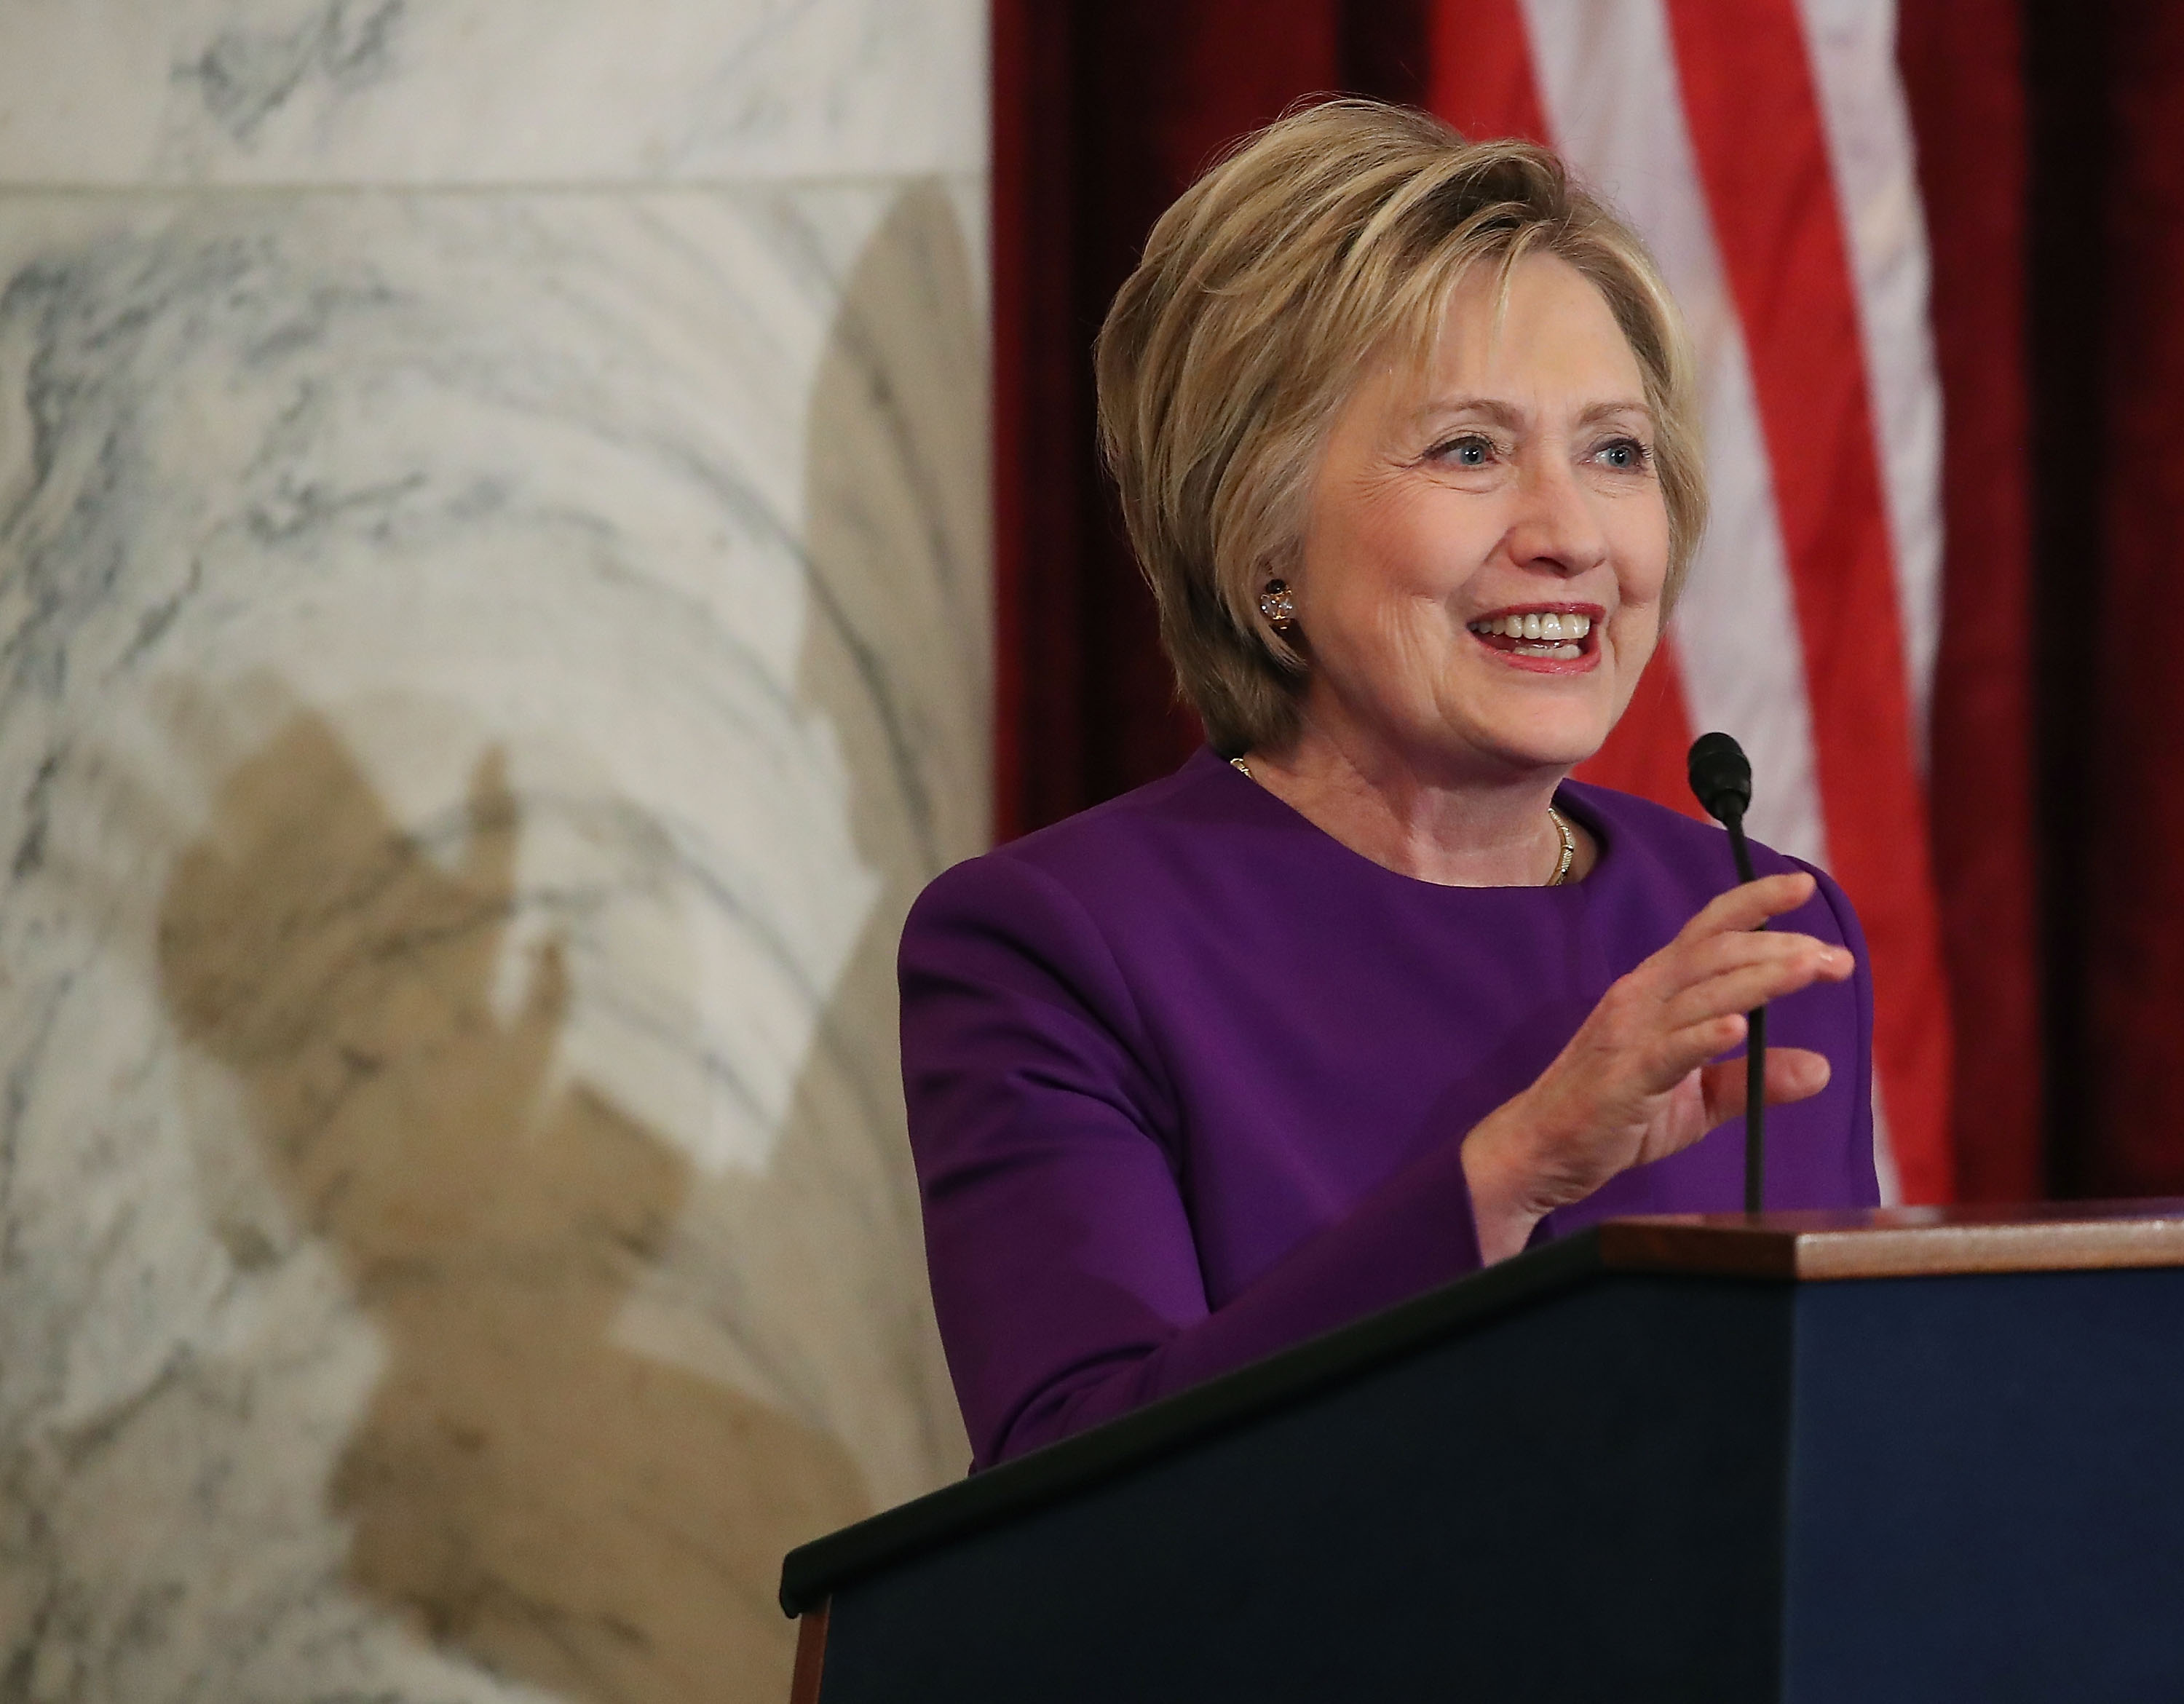 Former US Secretary of State, Hillary Clinton is applauded before speaking at a portrait unveiling ceremony for outgoing Senate Minority Leader Harry Reid (D-NV), on Capitol Hill December 8, 2016 in Washington, DC. (Mark Wilson—Getty Images)